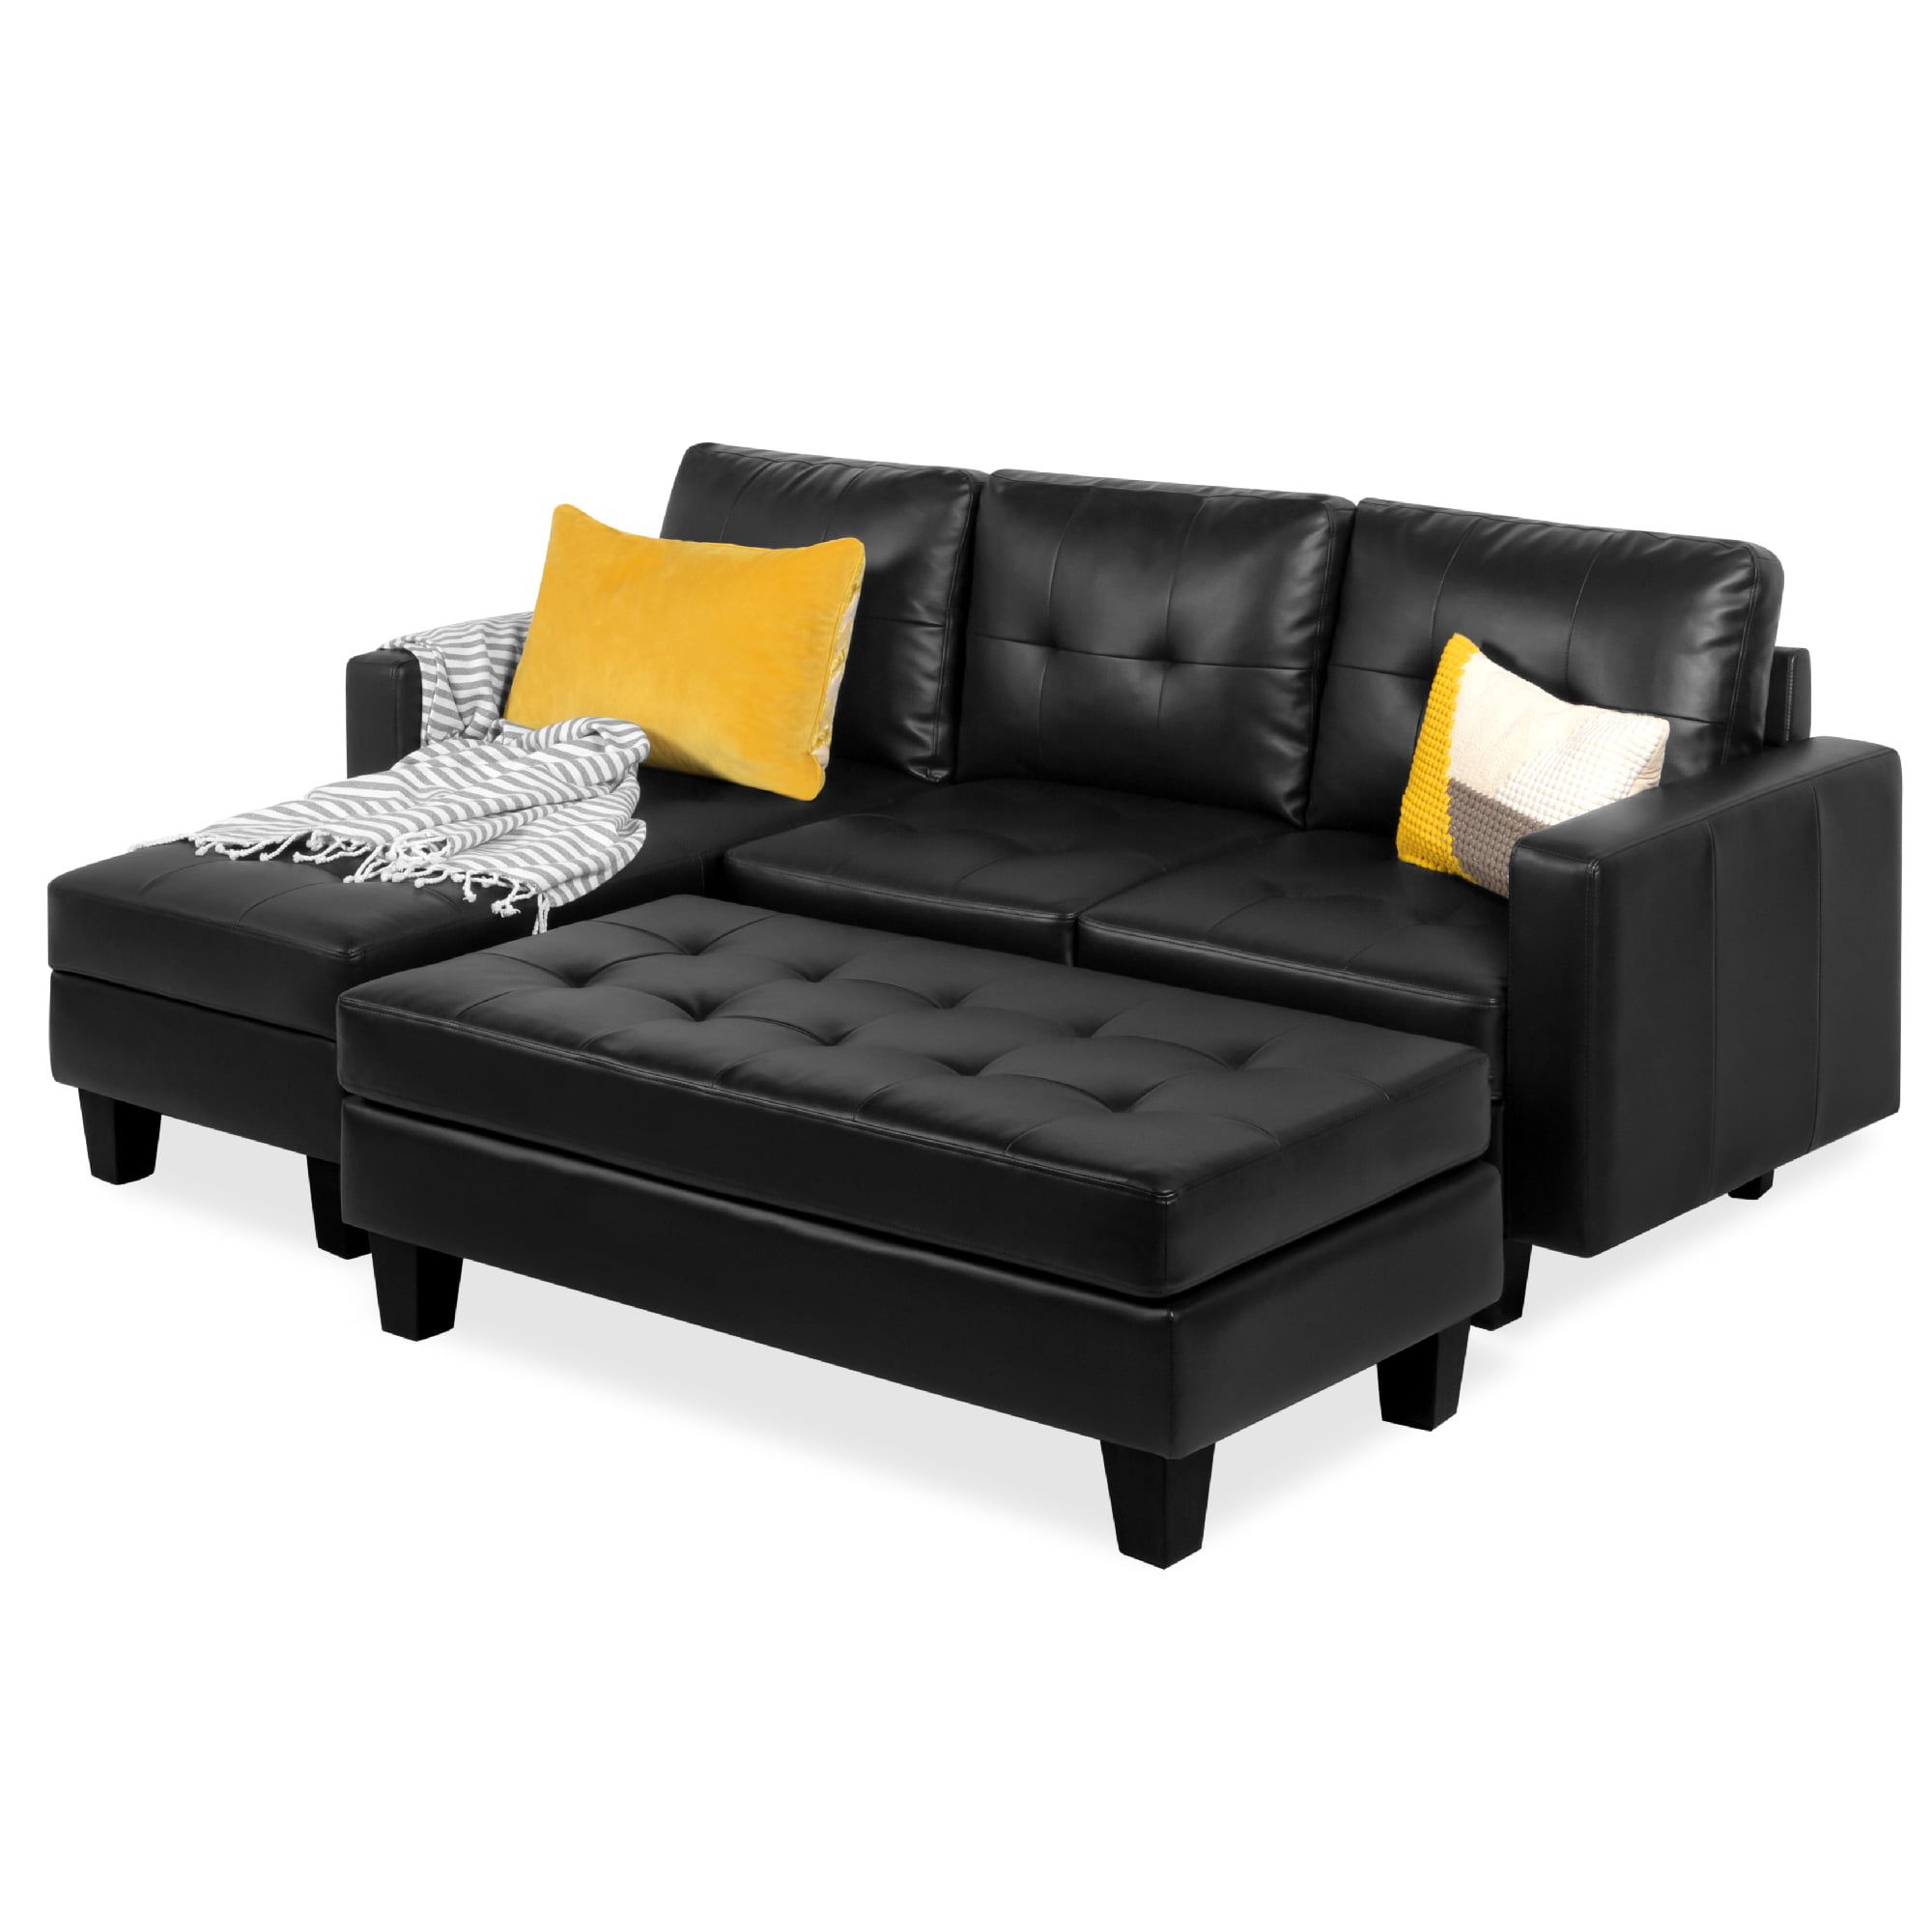 Best Choice Products 3 Seat L Shape Tufted Faux Leather Sectional Sofa With 3 Seat L Shaped Sofas In Black (Gallery 4 of 20)